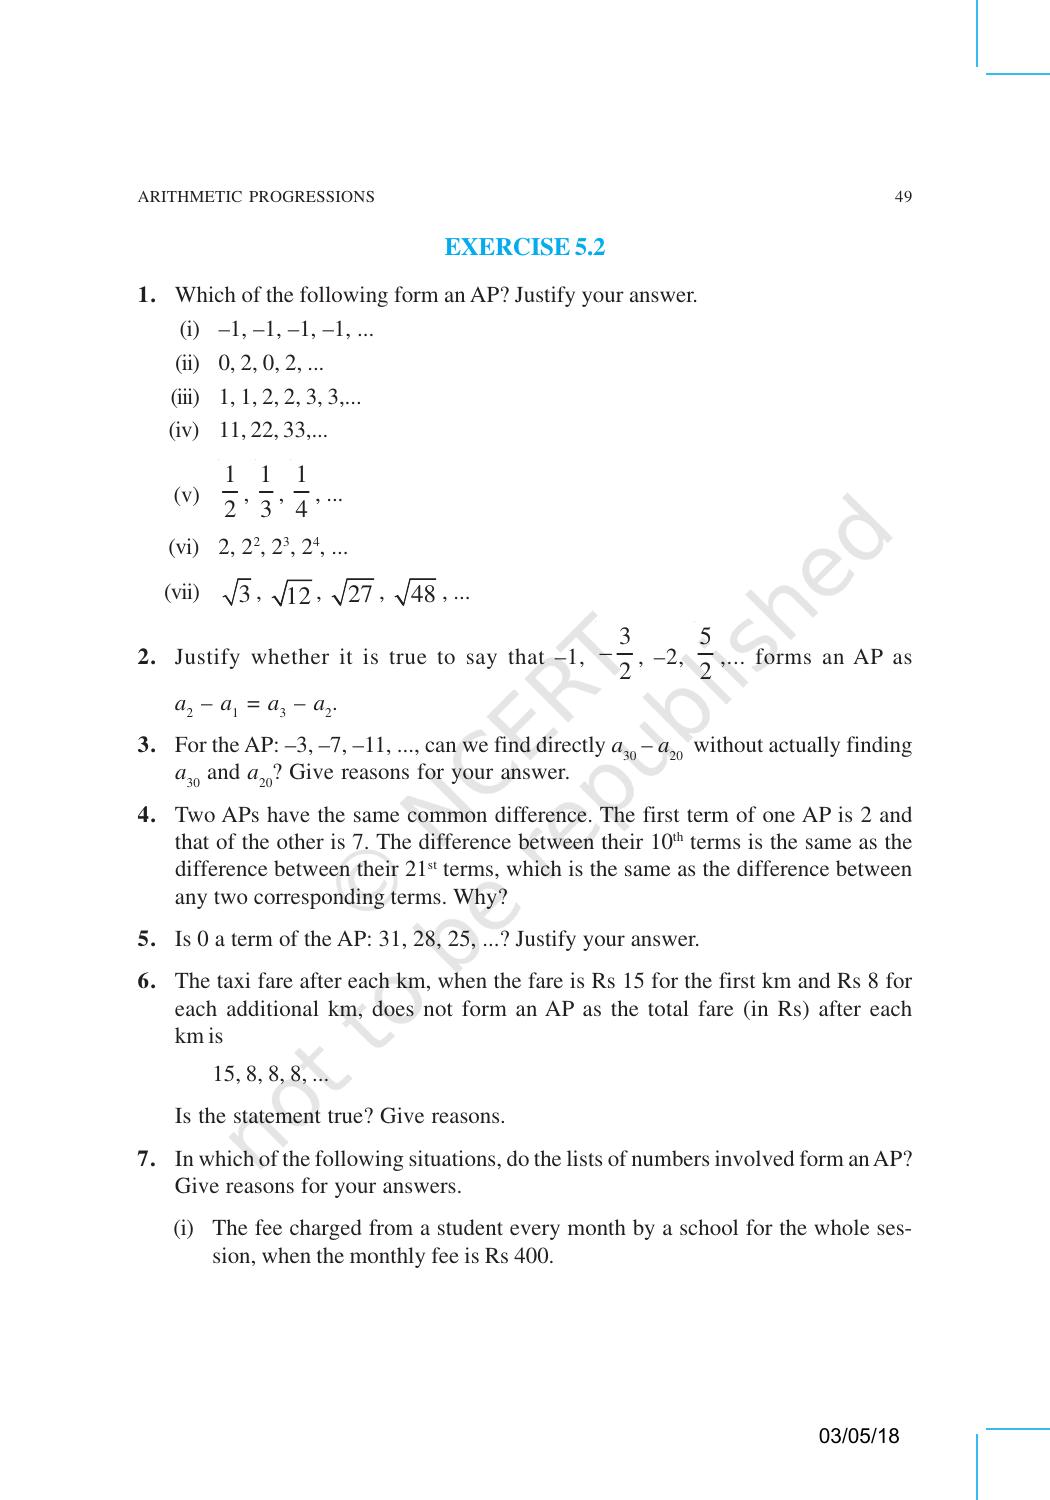 NCERT Exemplar Book for Class 10 Maths: Chapter 5 Arithmetic Progressions - Page 6